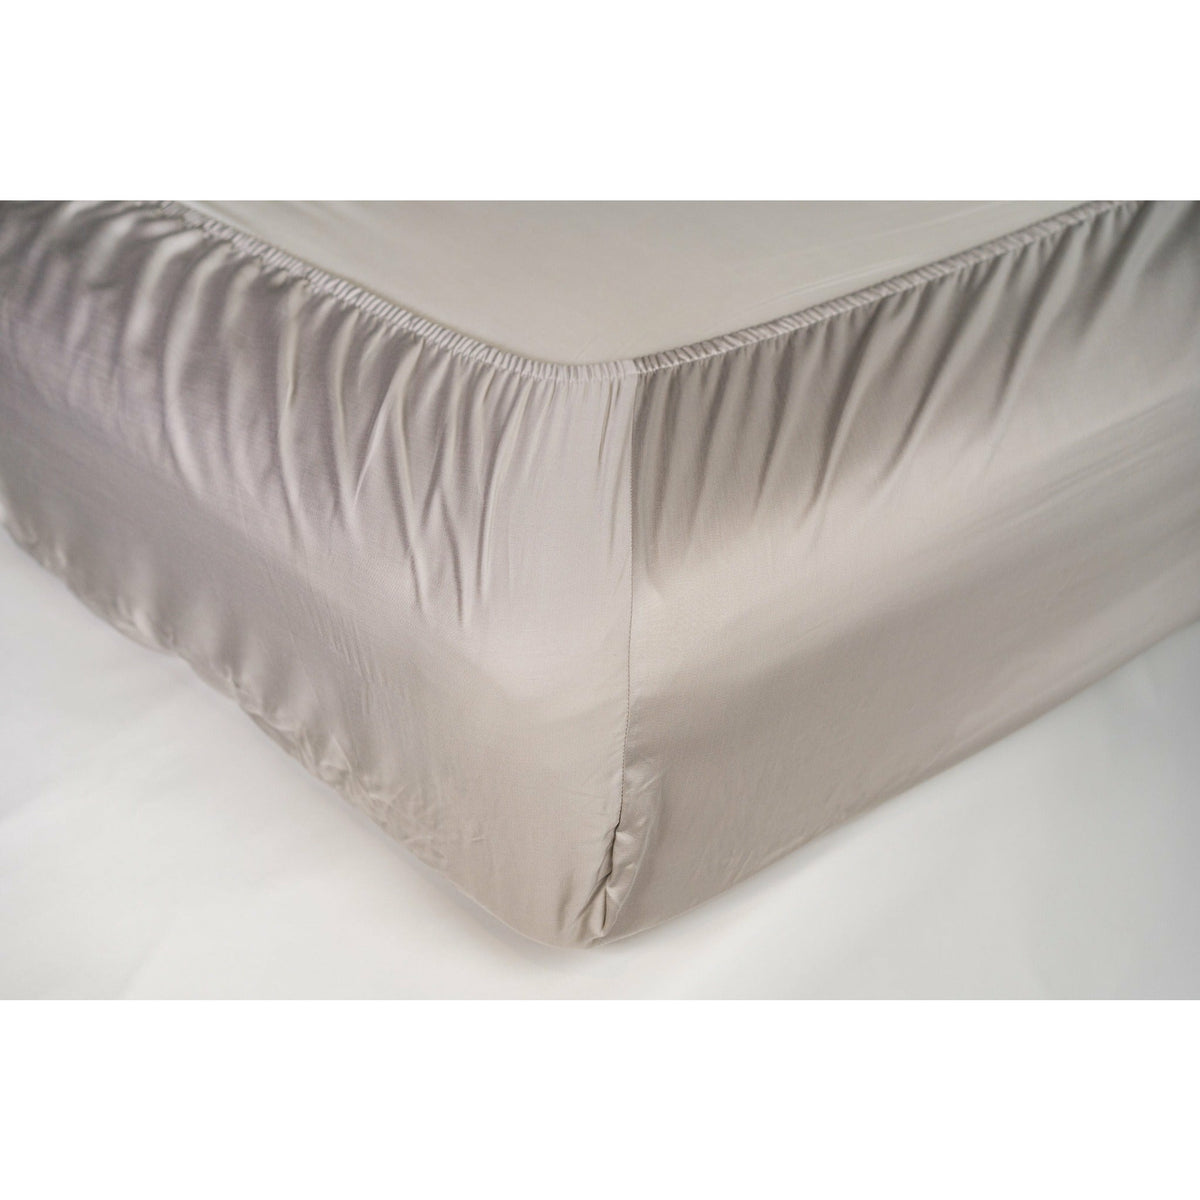 Eucalyptus fitted sheet